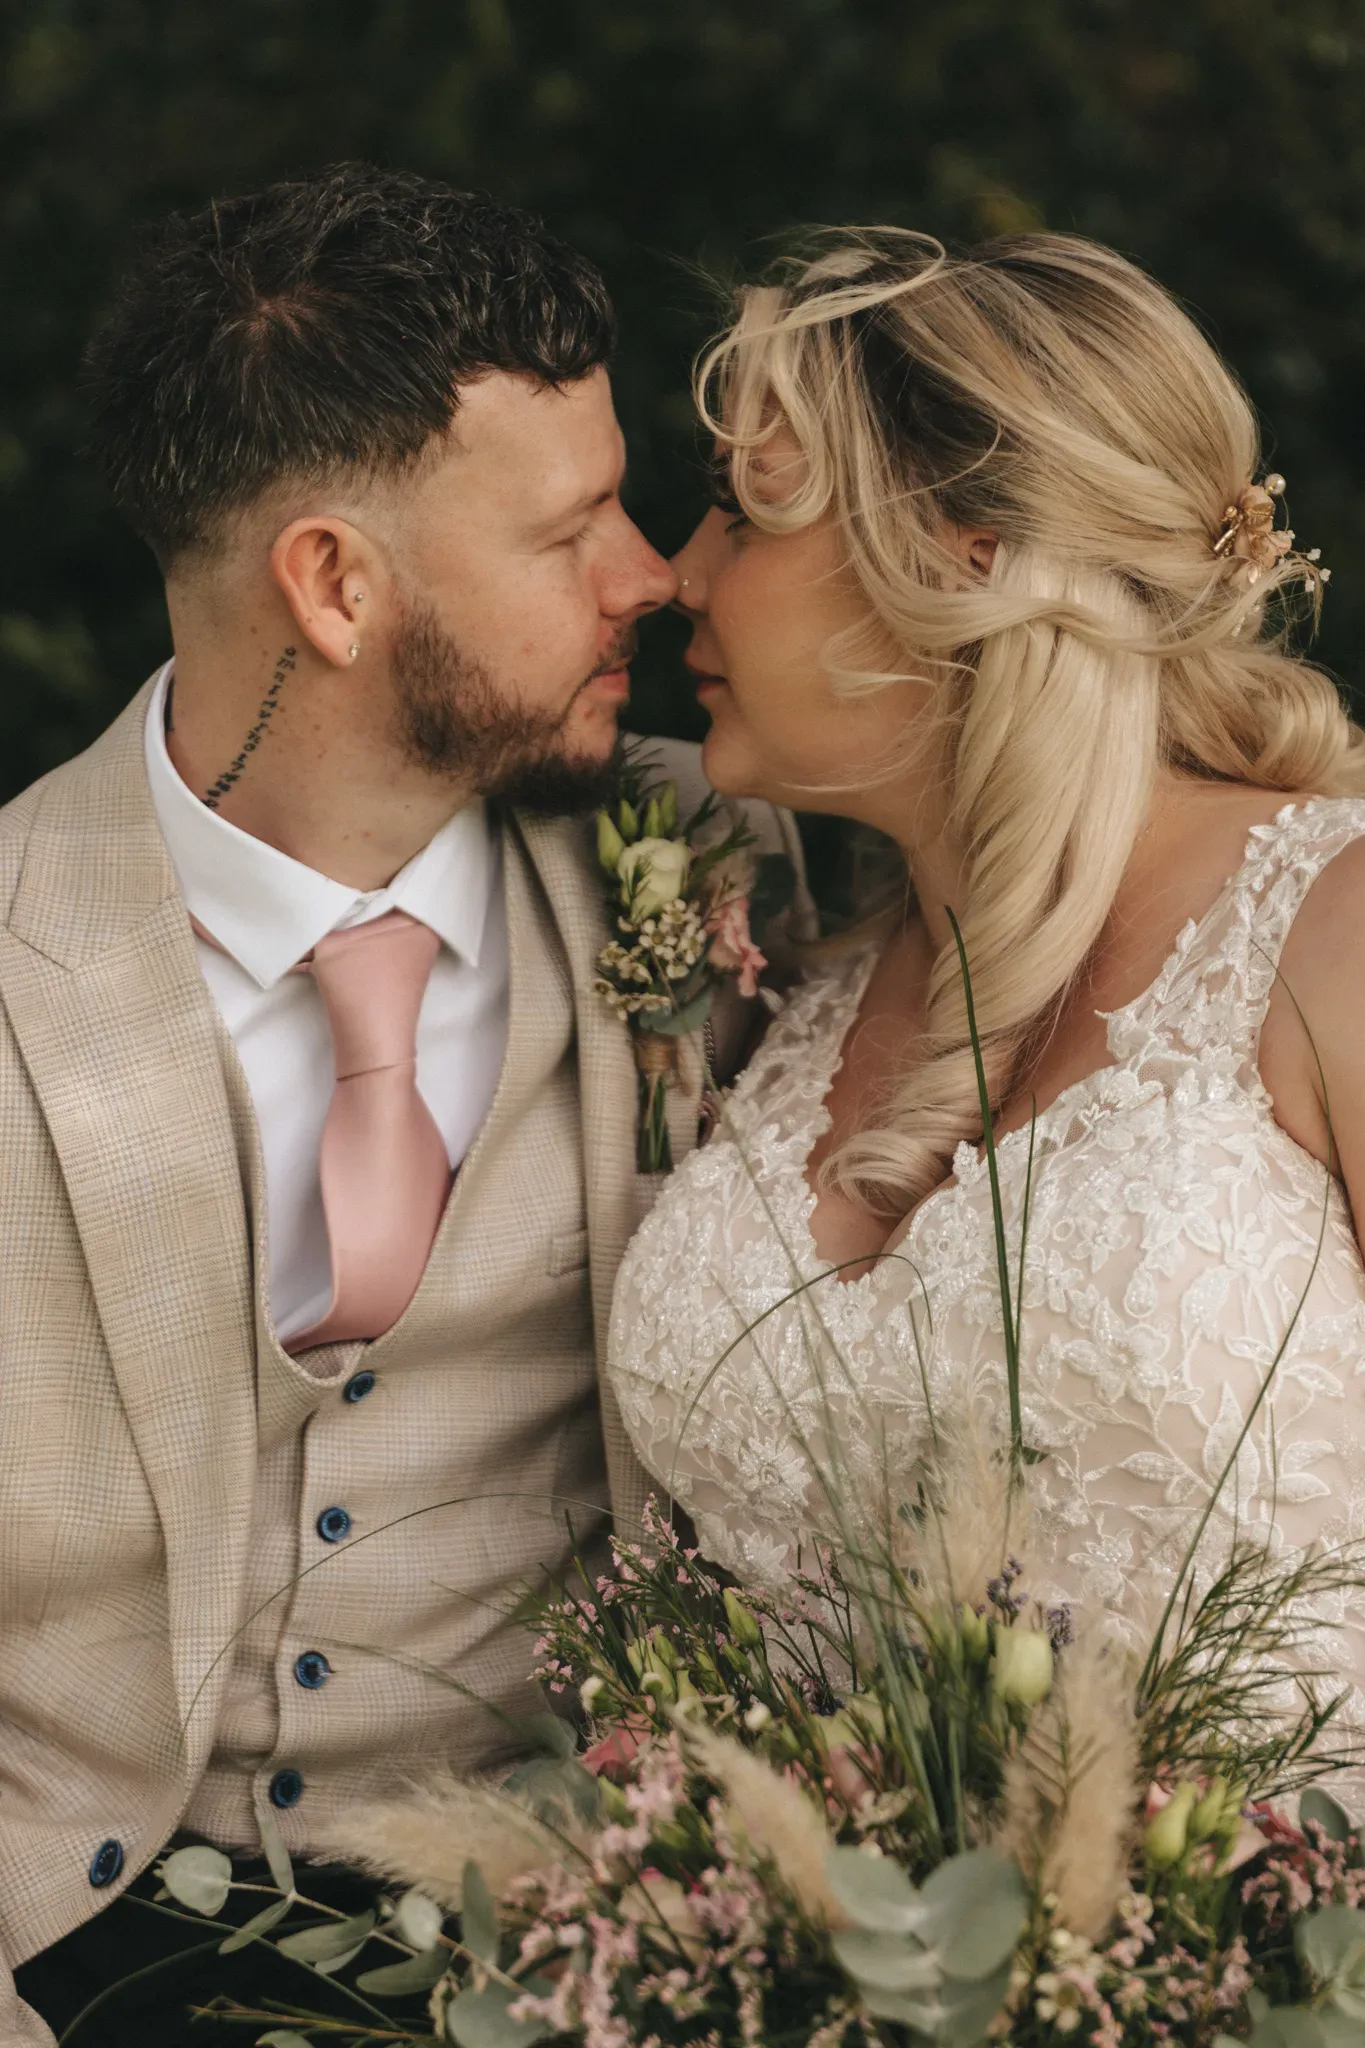 A bride and groom intimately touch foreheads, surrounded by greenery. the bride, in a lace wedding dress, has a delicate flower in her hair, while the groom wears a beige suit and pink tie.